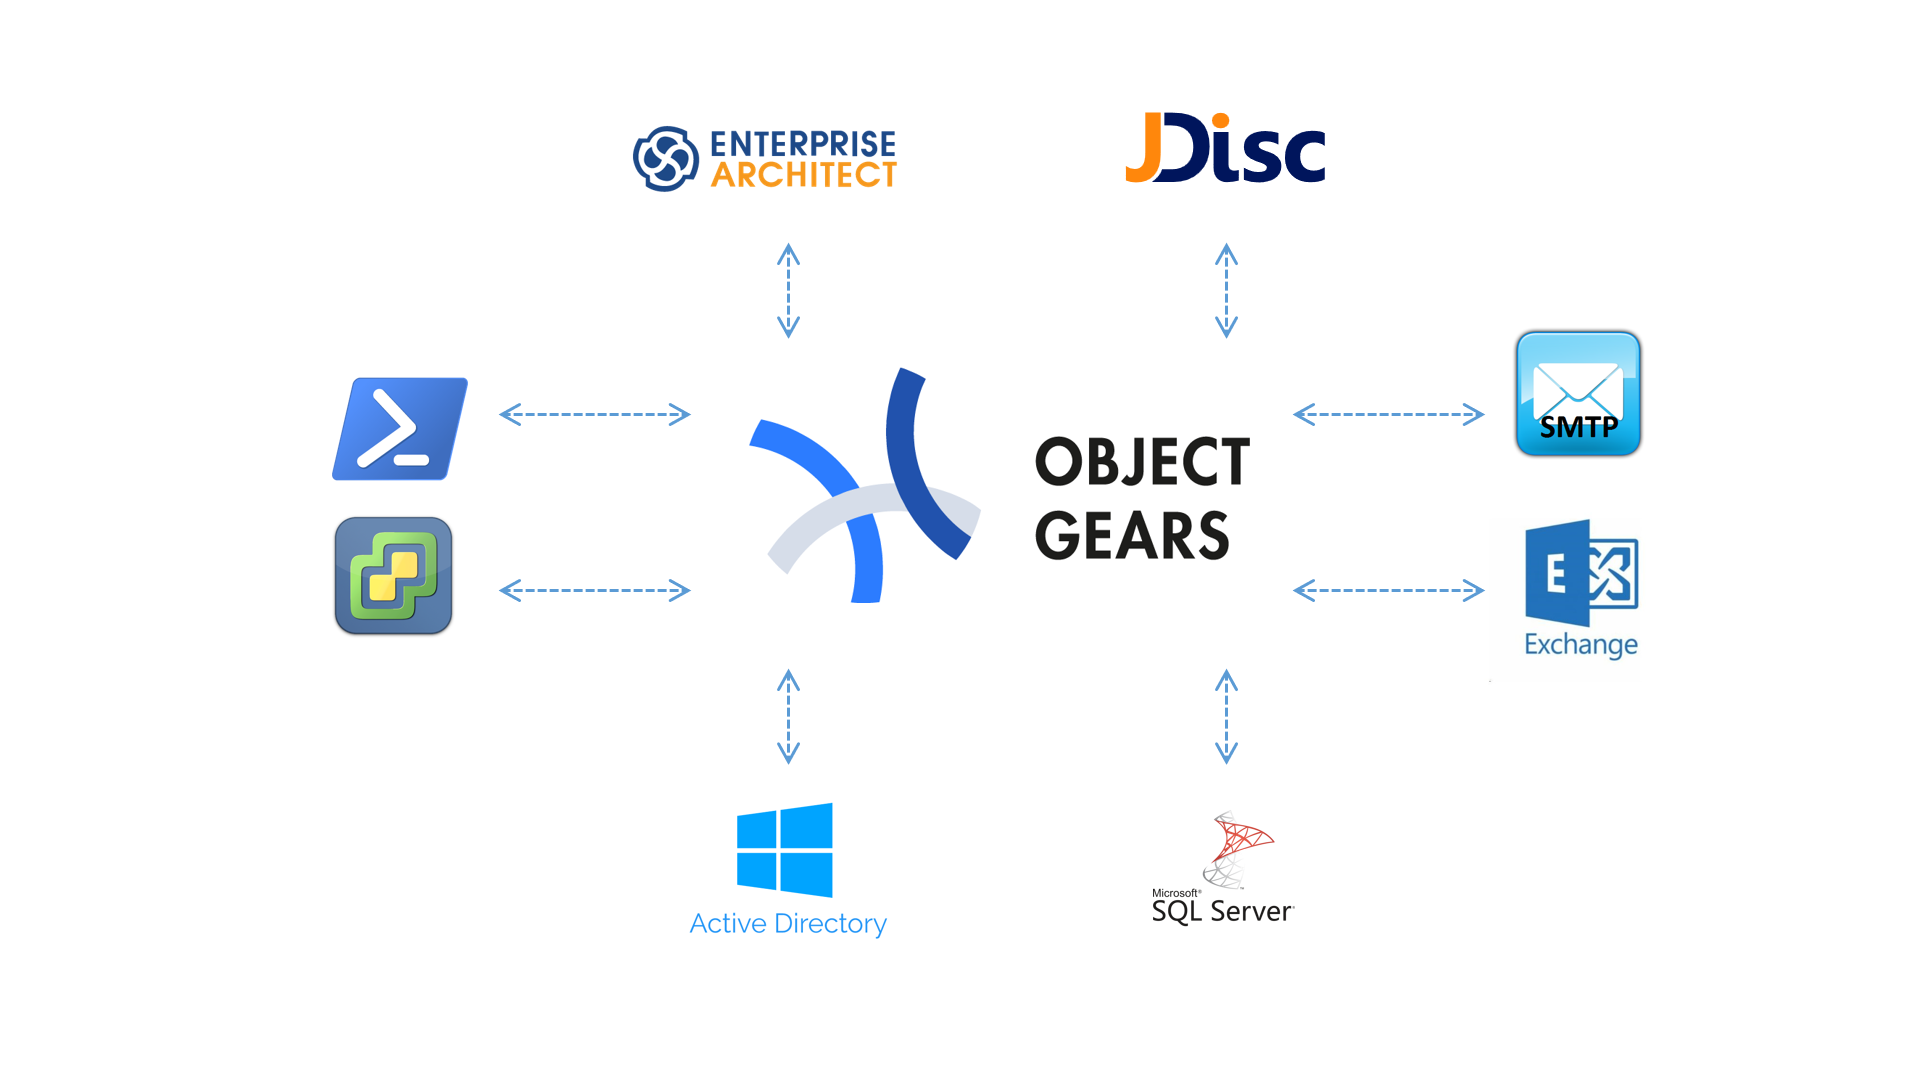 ObjectGears is a low code development platform with many integration possibilities.